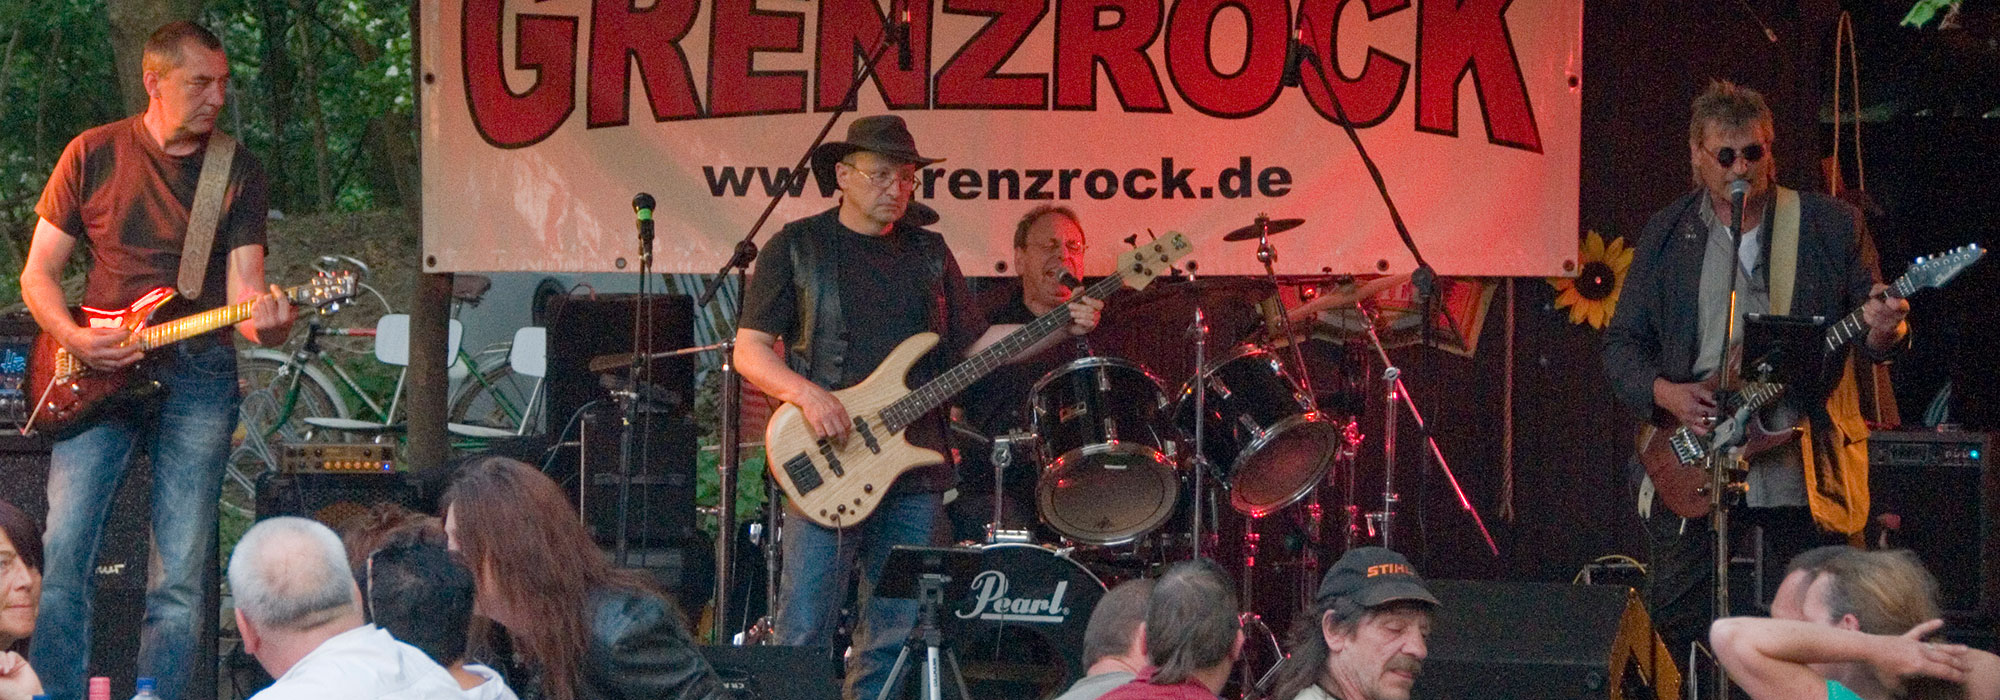 Grenzrock, Coverband, Salzgitter, Partyband